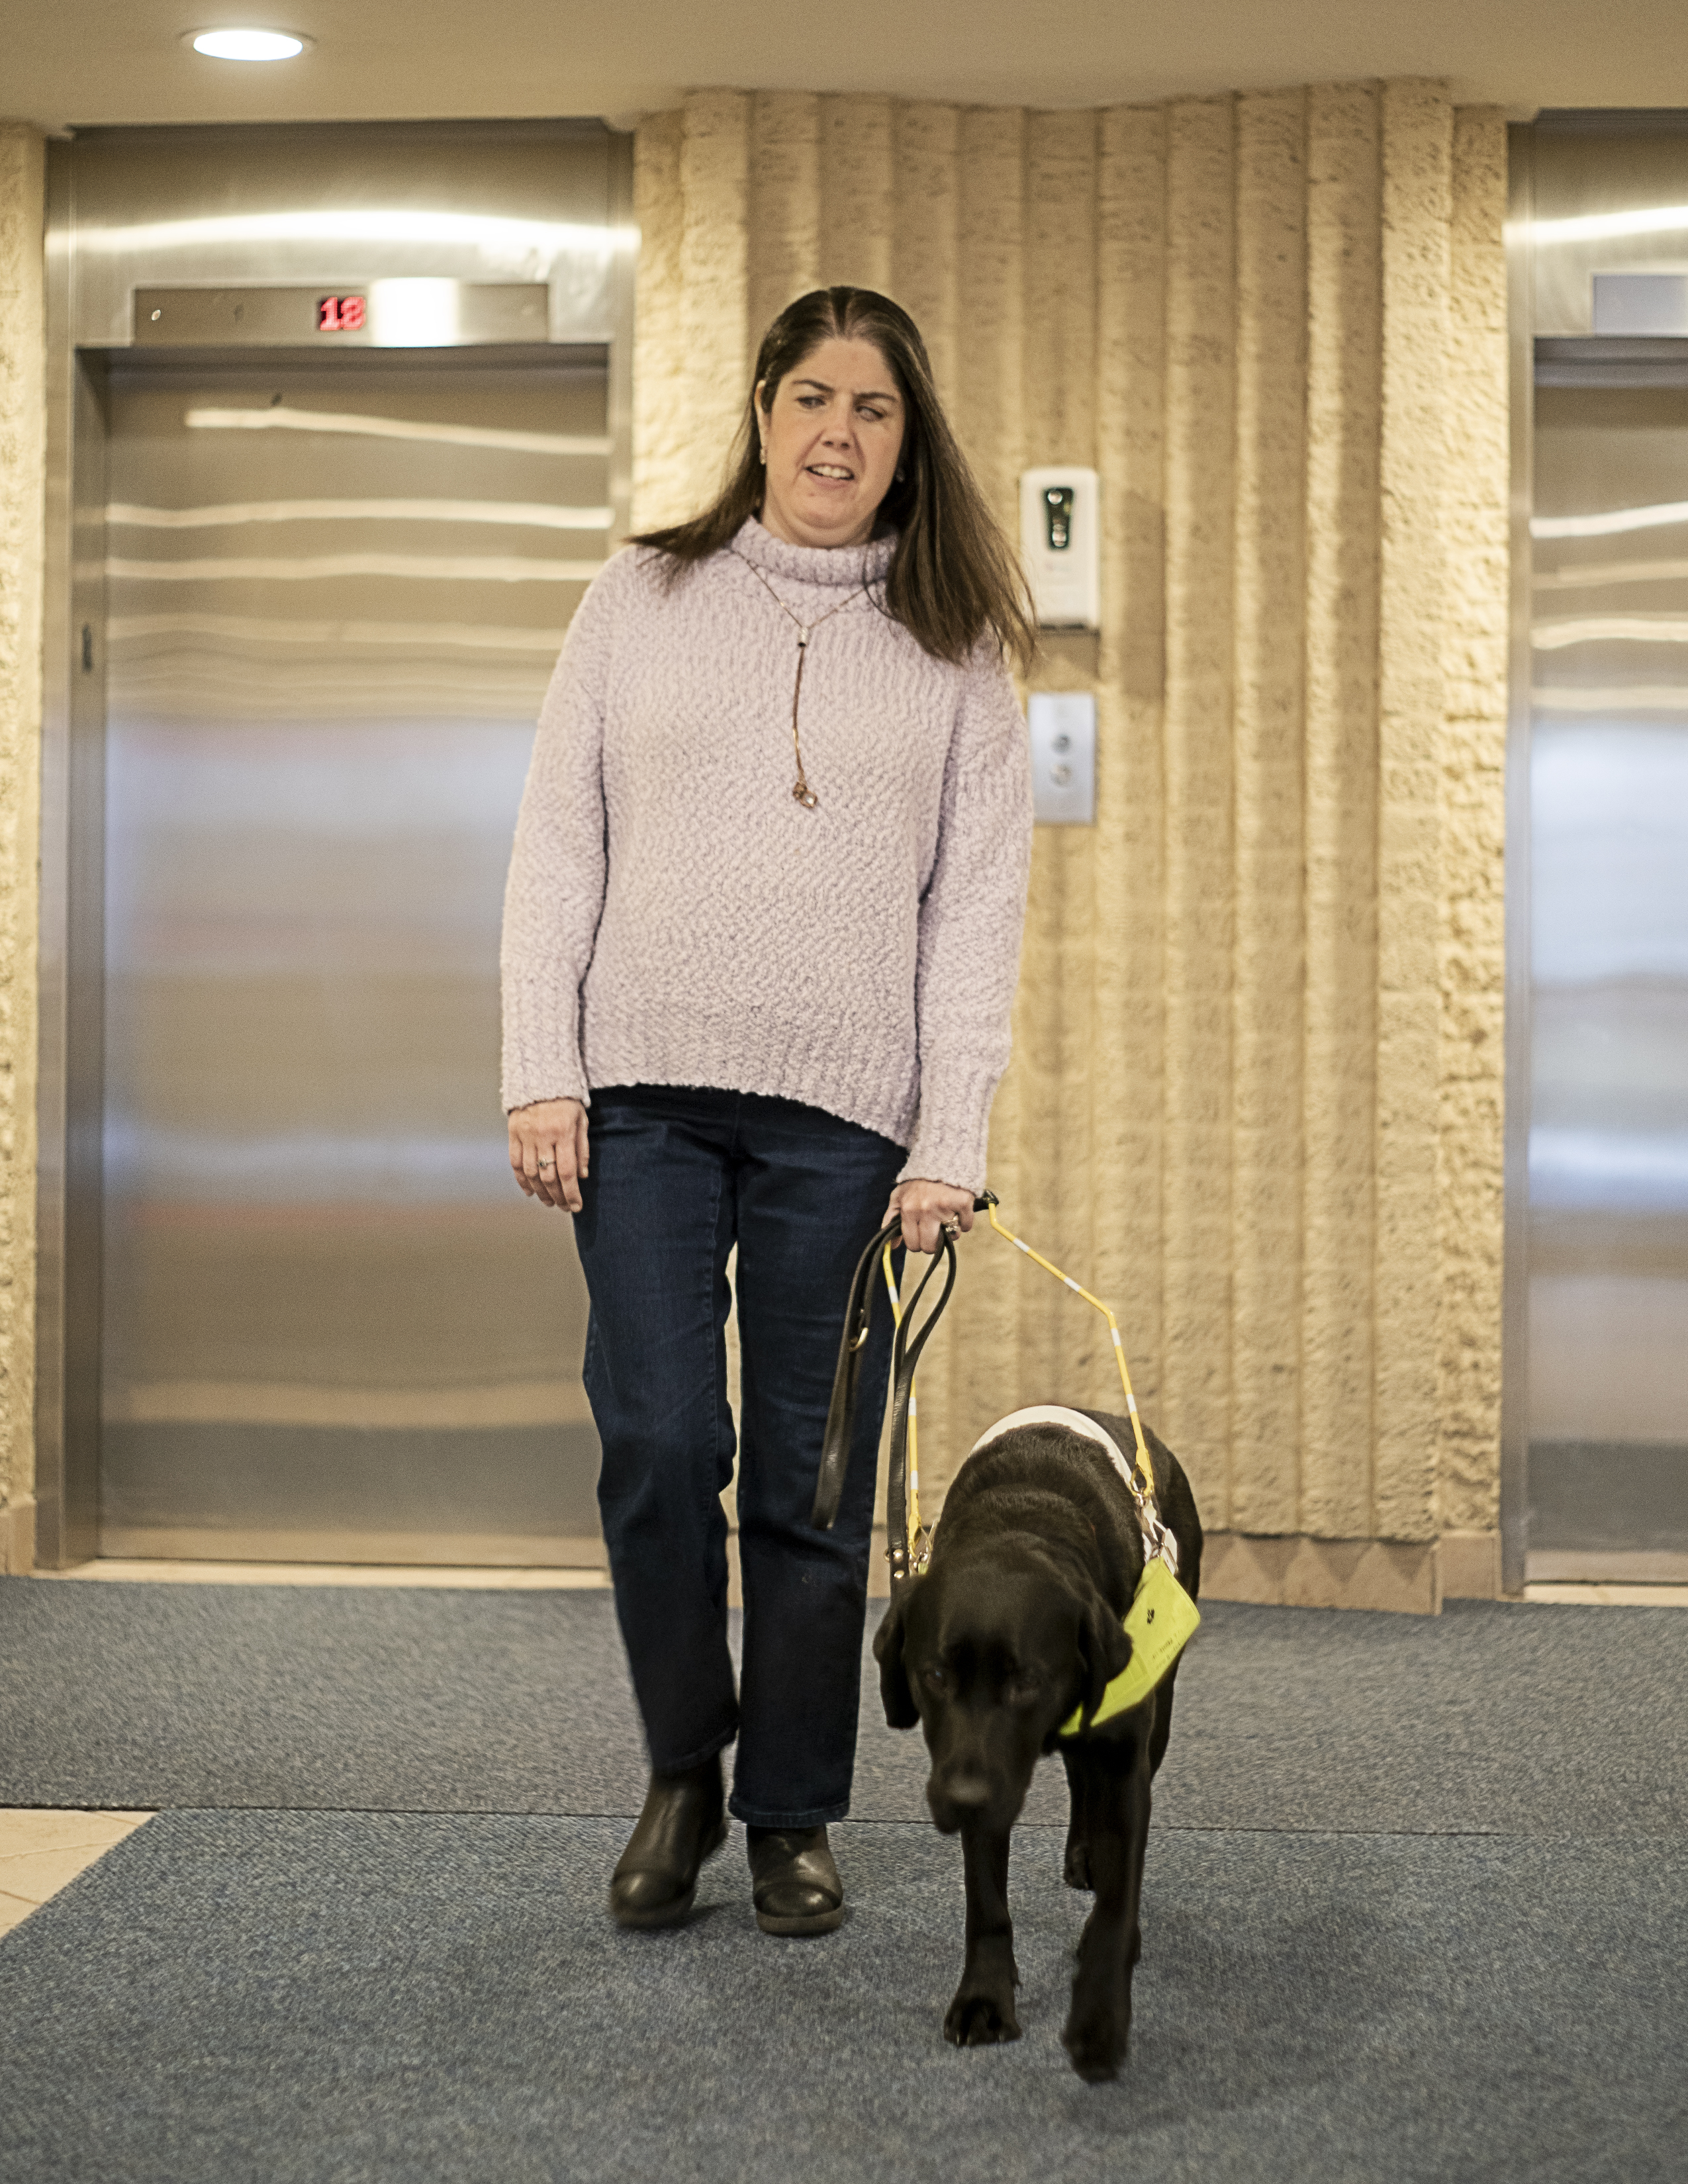 Karoline and her black guide dog, Raven, exit the lobby of a building. Behind them is a row of elevators.